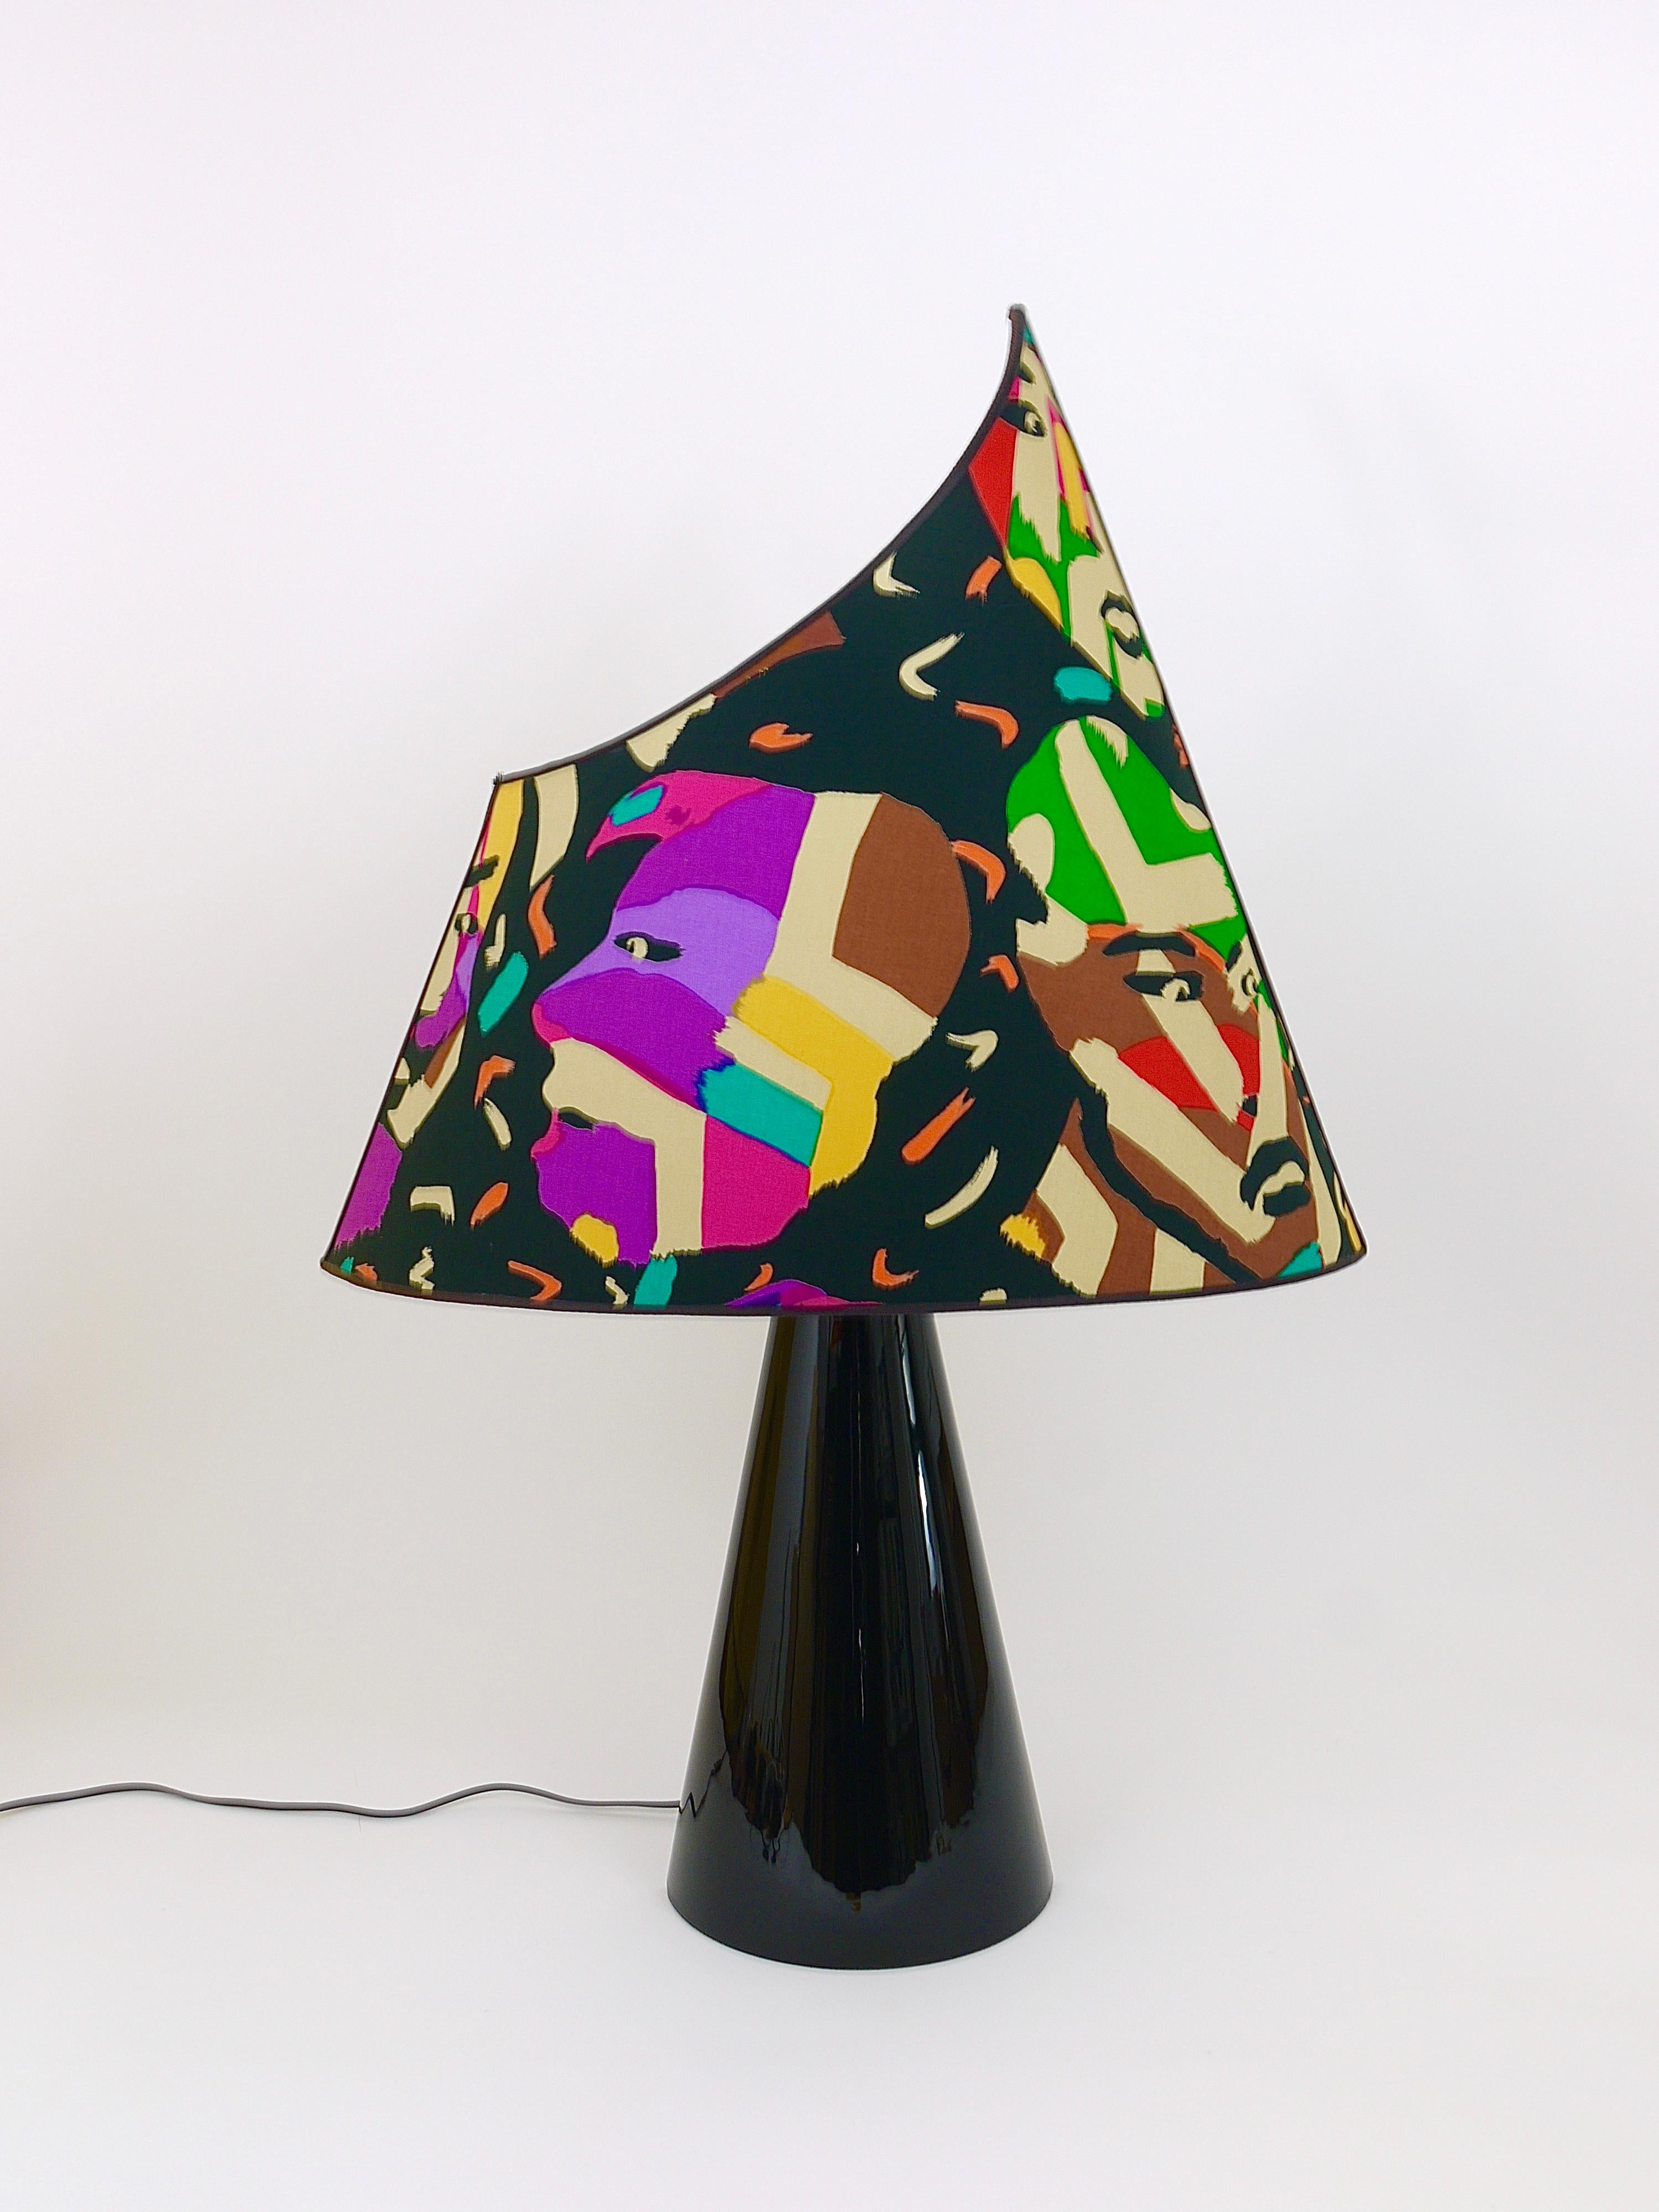 An amazing colorful postmodern Missoni table or side lamp from the 1980s, designed by Massimo Valloto, executed by Ceramiche Viba, Bassano, Italy. This light has a conical unusual ceramic base with black shiny glaze and an asymmetrical lampshade in